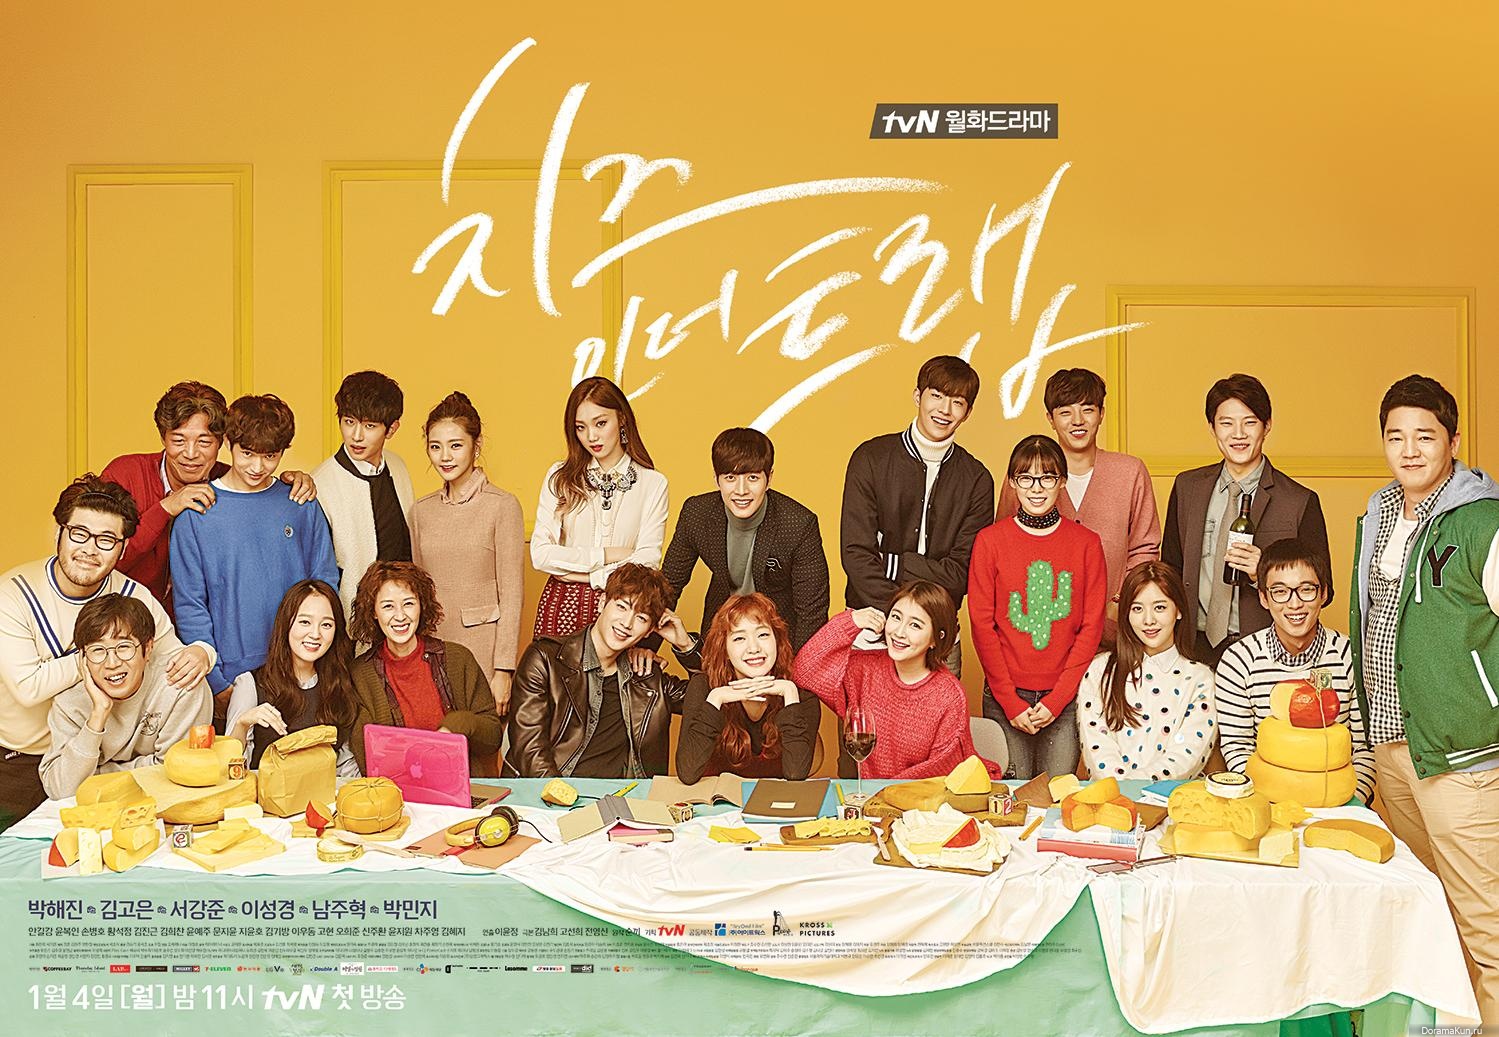 Сыр в мышеловке/Cheese in the trap (2016) - Страница 2 Cheese-in-the-Trap-Poster3-1499